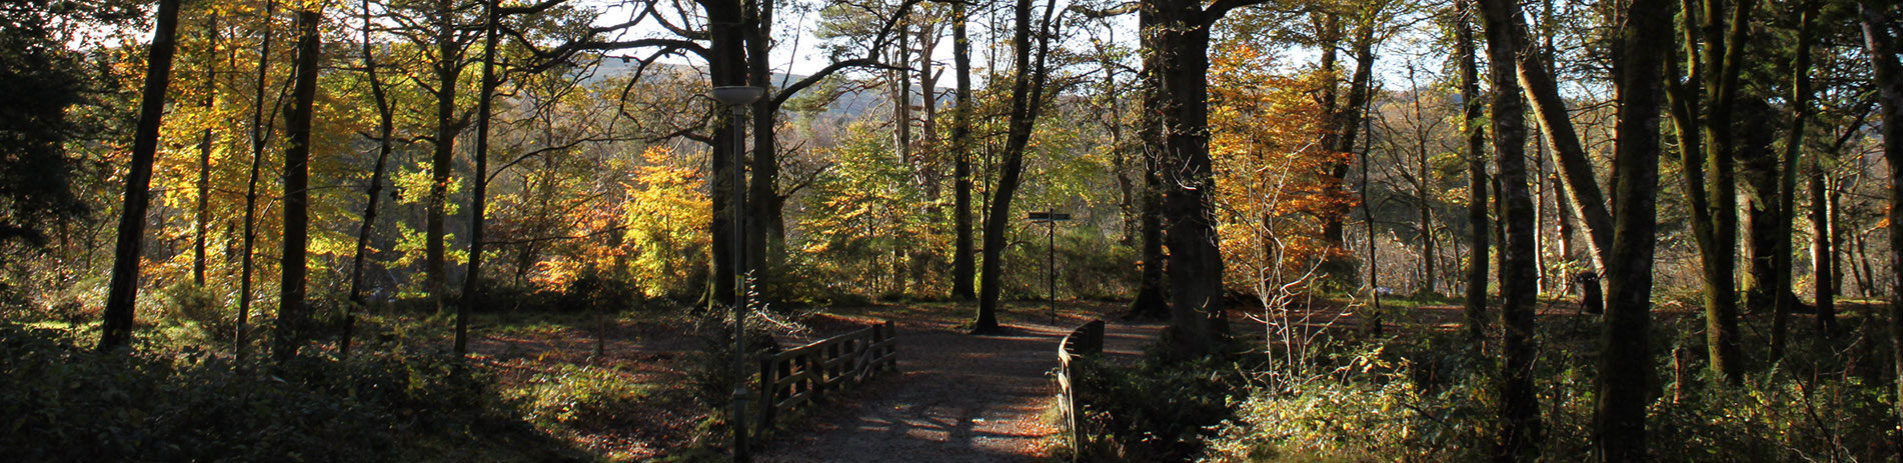 path-in-balloch-castle-country-park-with-small-bridge-crossing-stream-autumn-trees-and-leaves